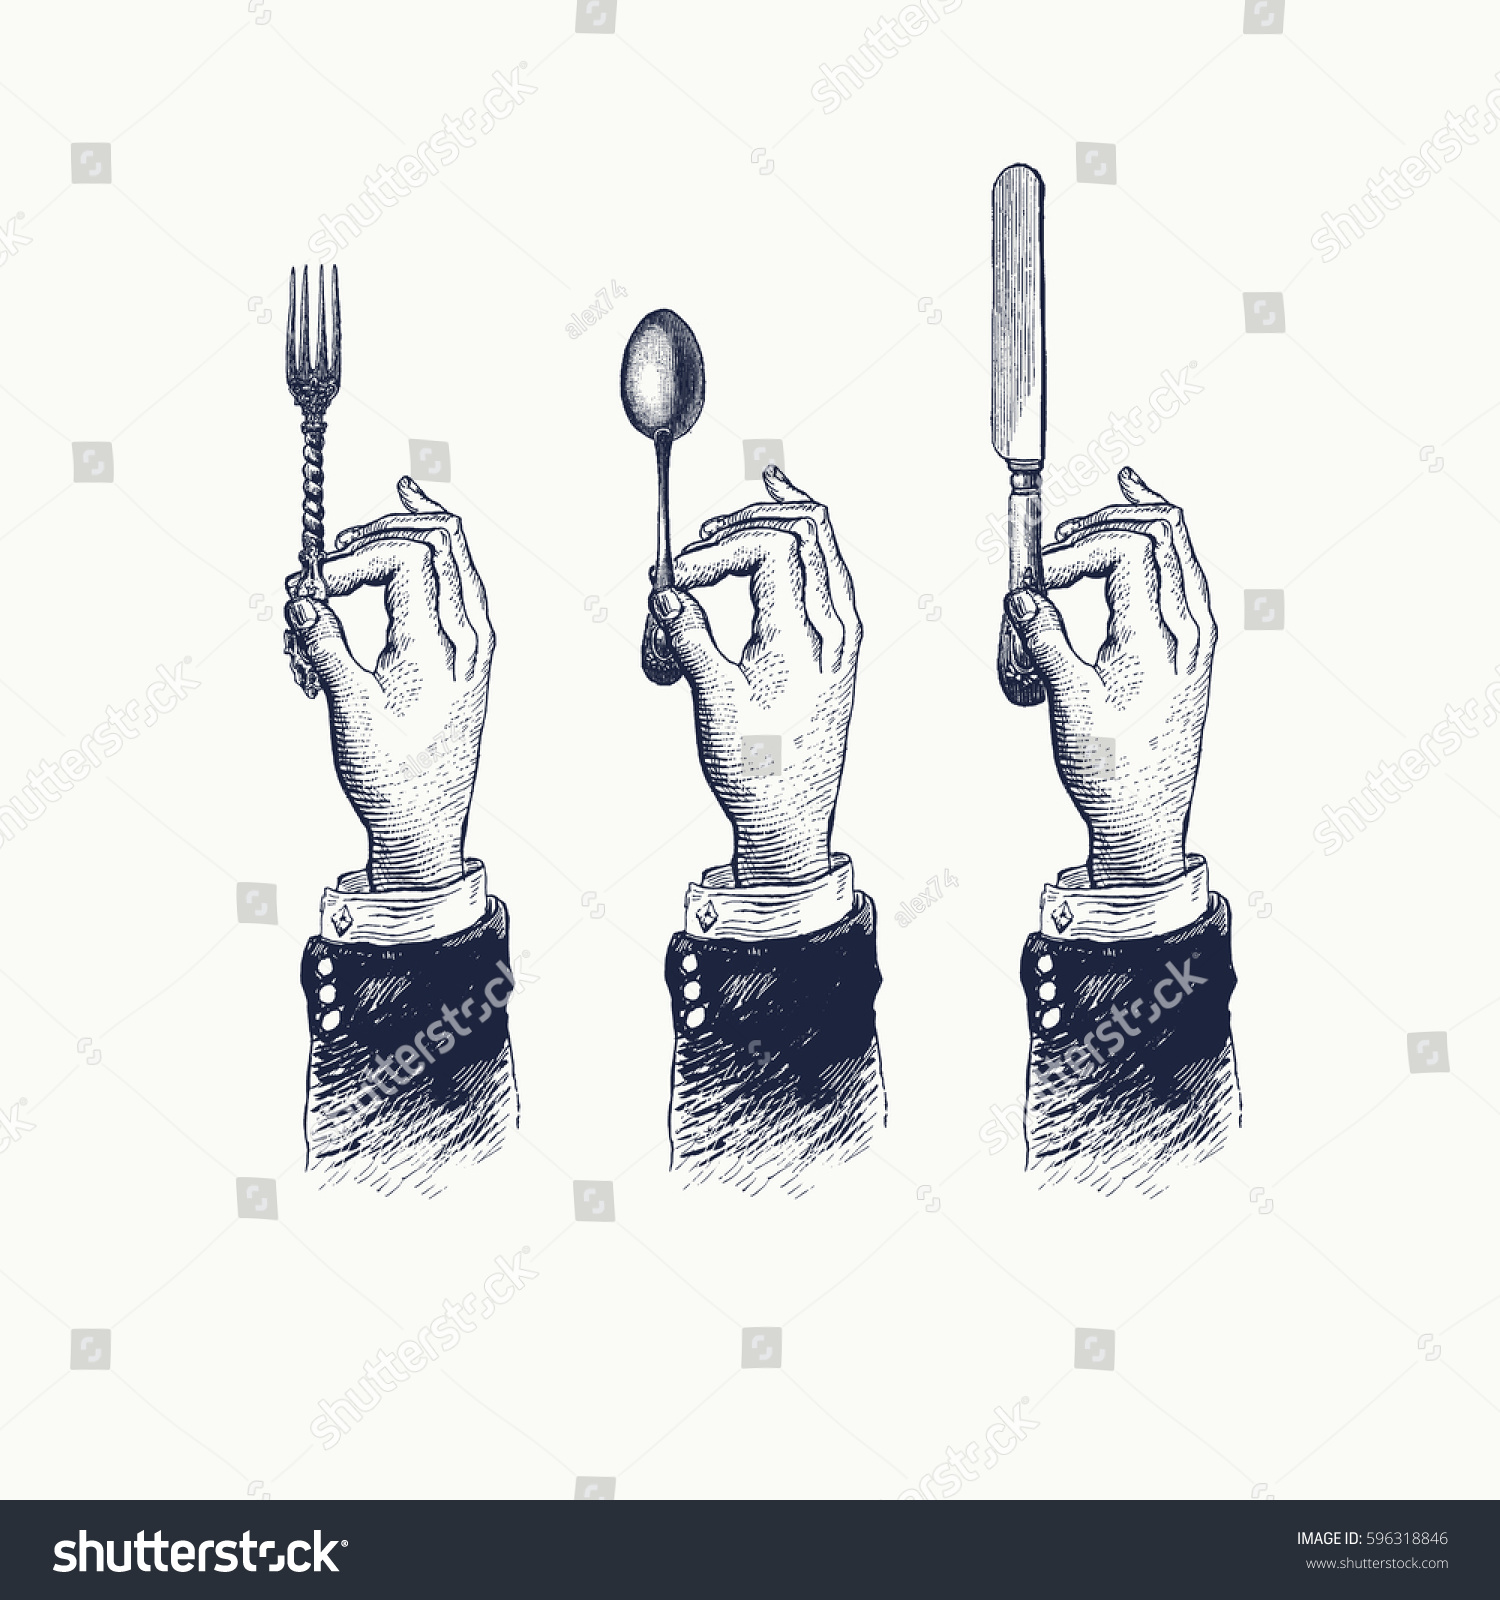 Hands with cutleries. Spoon, fork and knife. Vintage stylized drawing. Vector illustration in a retro woodcut style #596318846